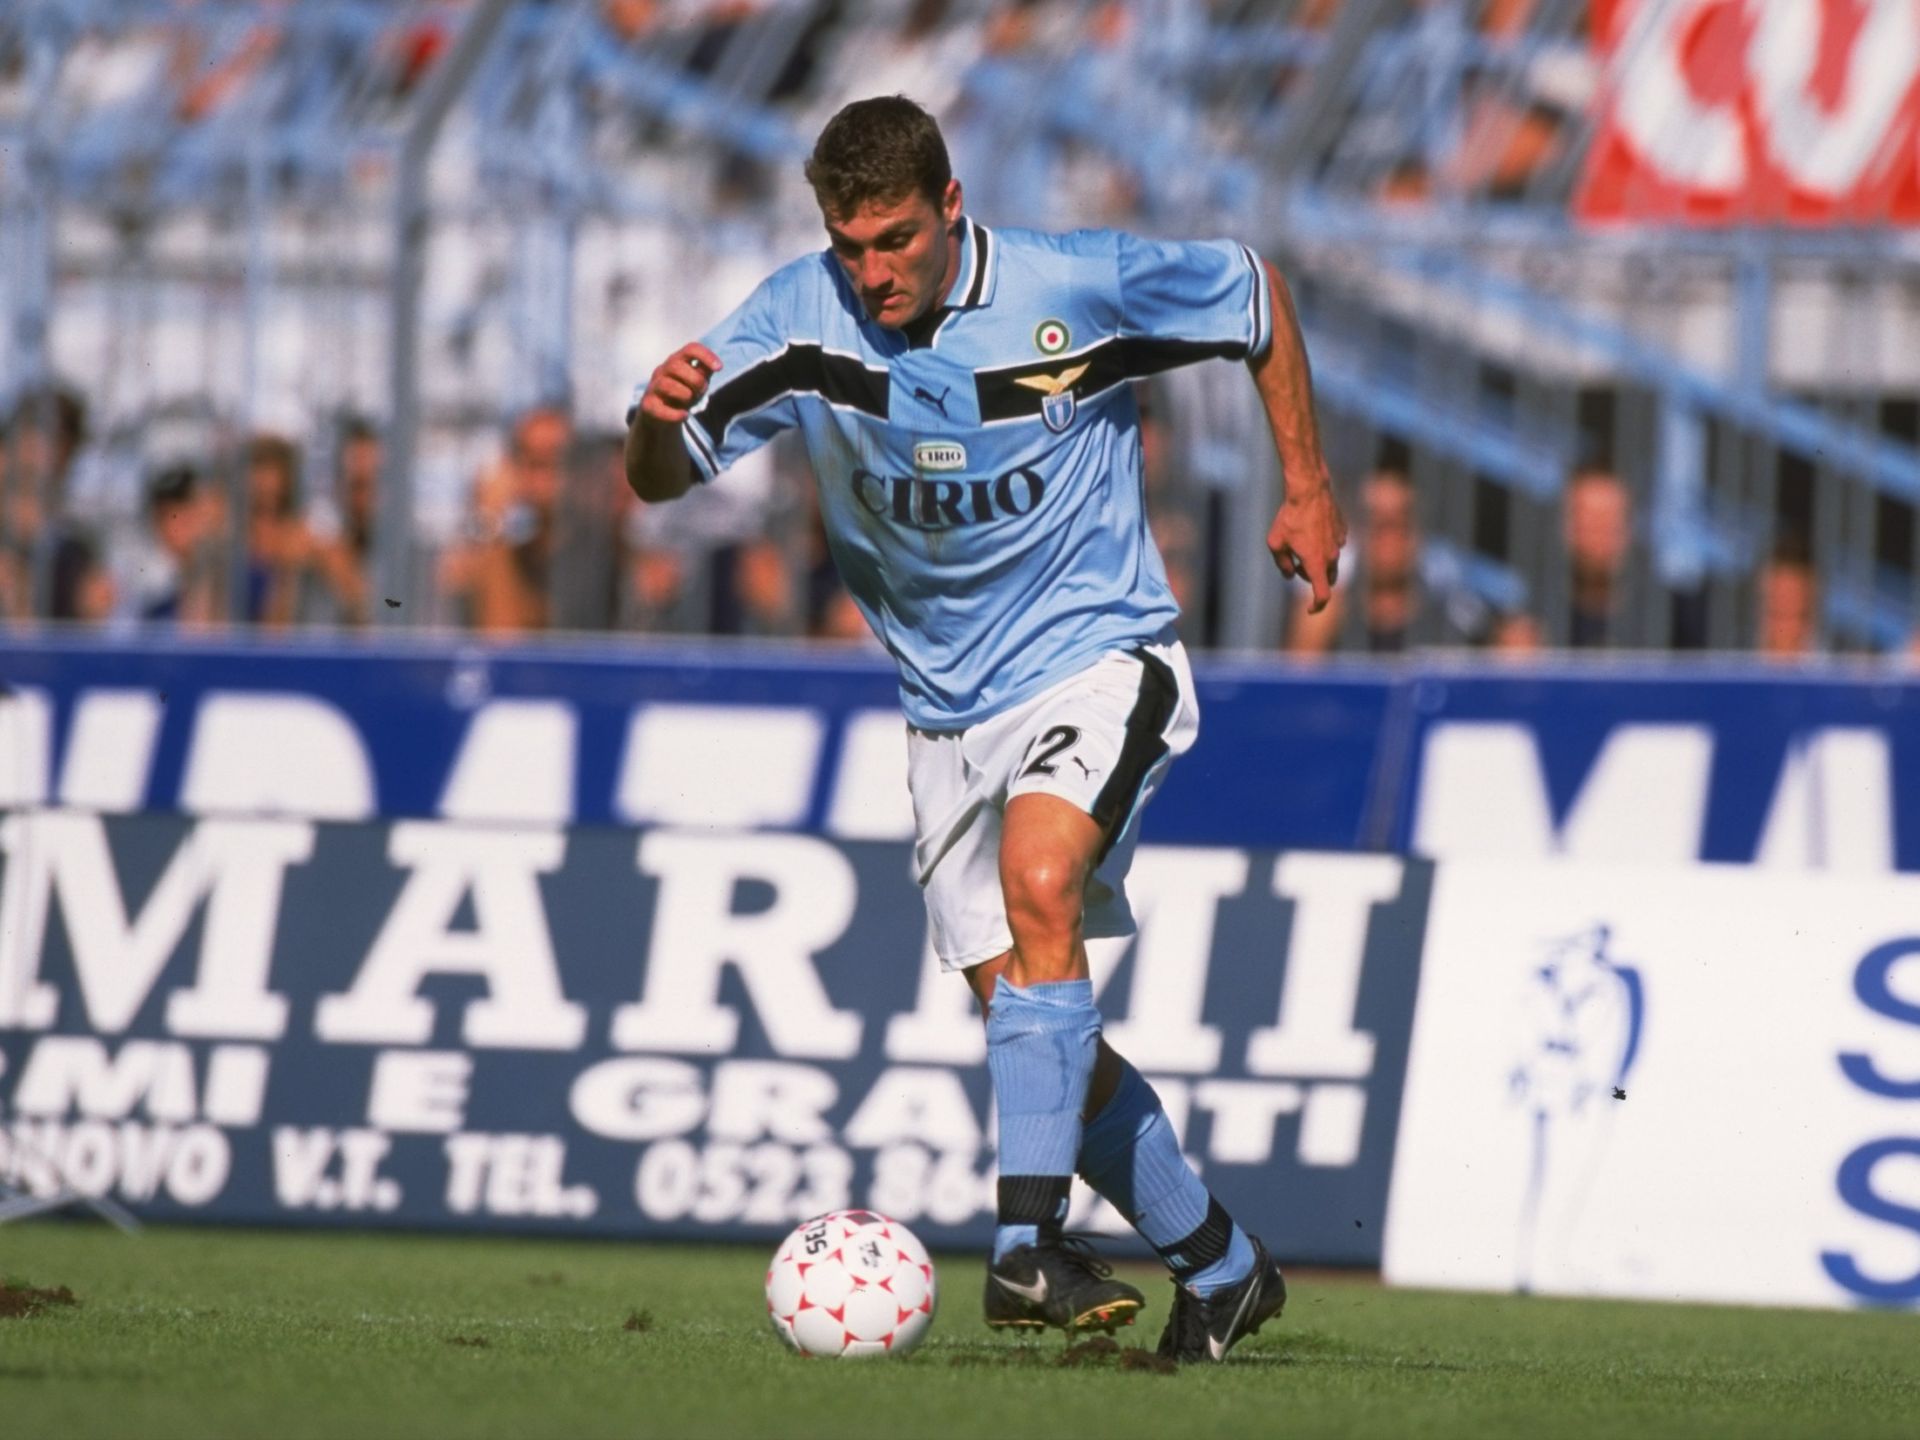 <p>                     Christian Vieri was on the move a lot in the 1990s and the Italy striker returned to his homeland with Lazio in 1998 following a successful season at Atletico Madrid.                   </p>                                      <p>                     Vieri joined Lazio for a fee of around €28.4 million and scored 14 goals in 28 appearances, including one in the 2-1 win over Mallorca in the 1999 Cup Winners' Cup final. It turned out to be his final game for the club...                   </p>